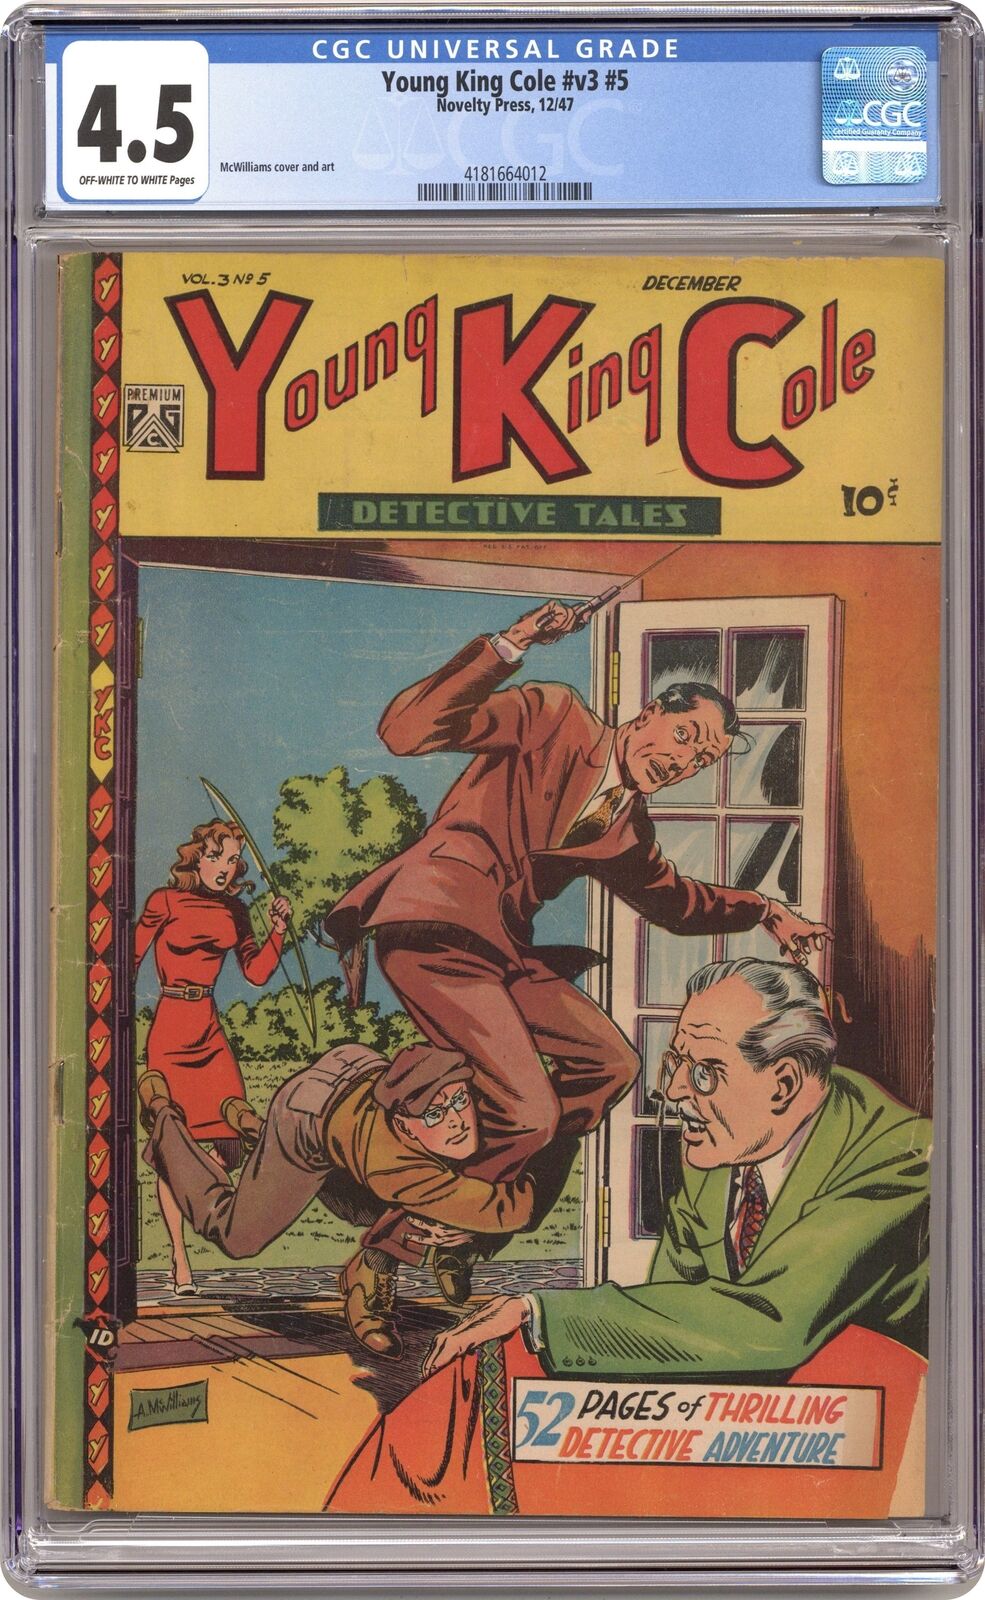 Young King Cole Vol. 3 #5 CGC 4.5 1947 4181664012